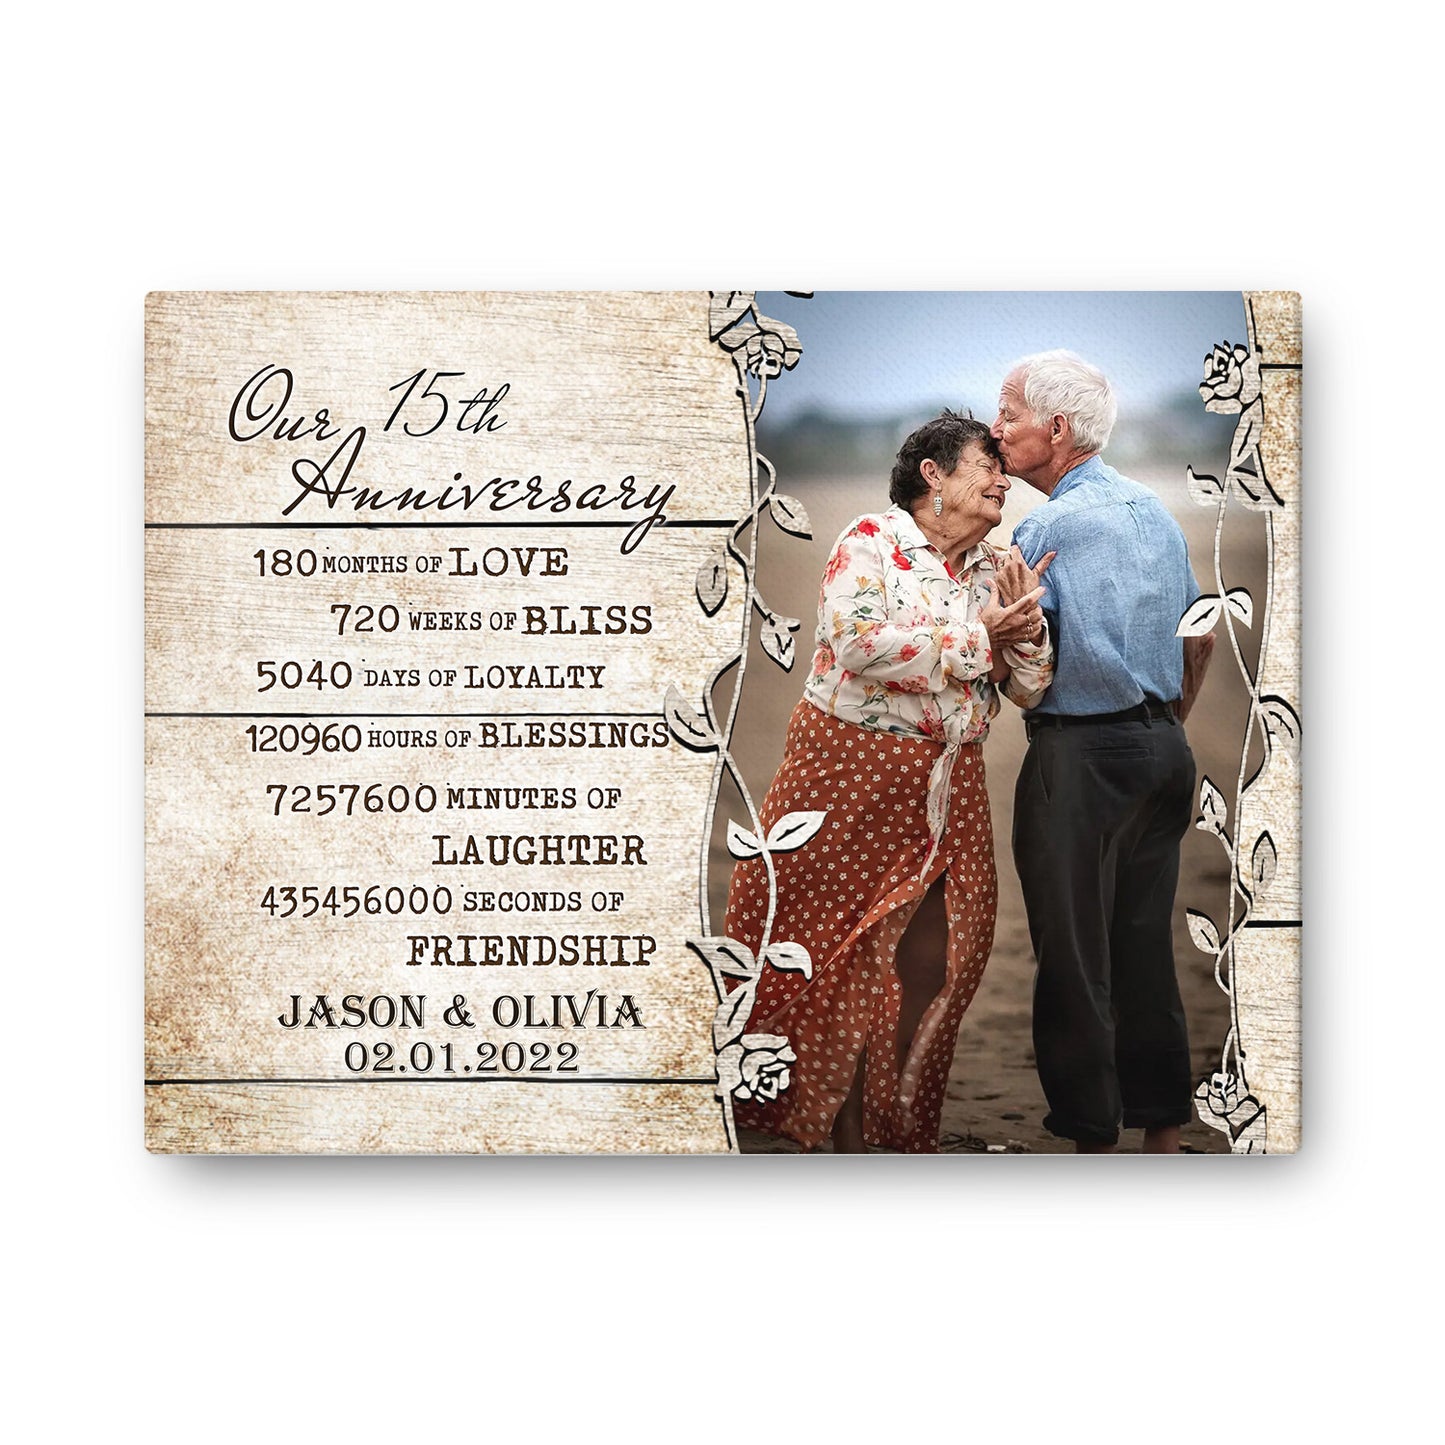 Our 15th Anniversary Timeless love Valentine Gift Personalized Canvas